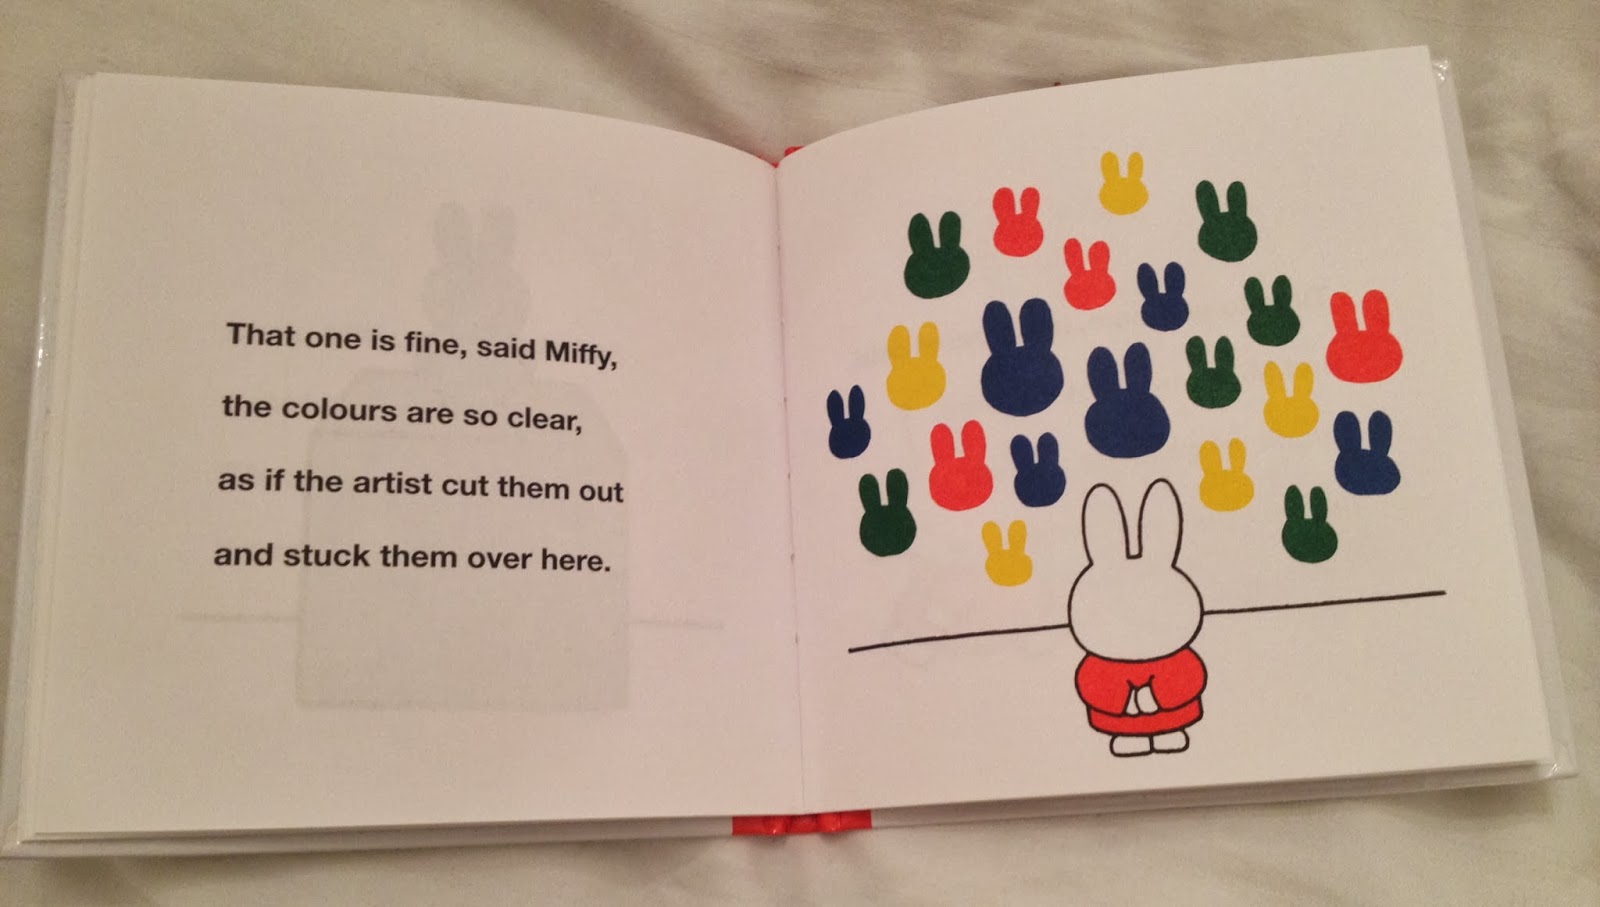 mamasVIB | V. I. BOOKCLUB: Meet Thoroughly Modern Miffy… the 50 year old bunny gets a re-fresh! | Meet Thoroughly Modern Miffy… the 50 year old bunny gets a re-fresh! | miff gets modern | miff | miff books | new miff books launch | dick bruna | miff lamp | alex and alexa | vintage books | classic library | book club special | mamasVIB | bonita turner| miff | dutch miff | nursery books | kids books | modern miff | #modernmiffy | mamas very important baby | mummy blogs 